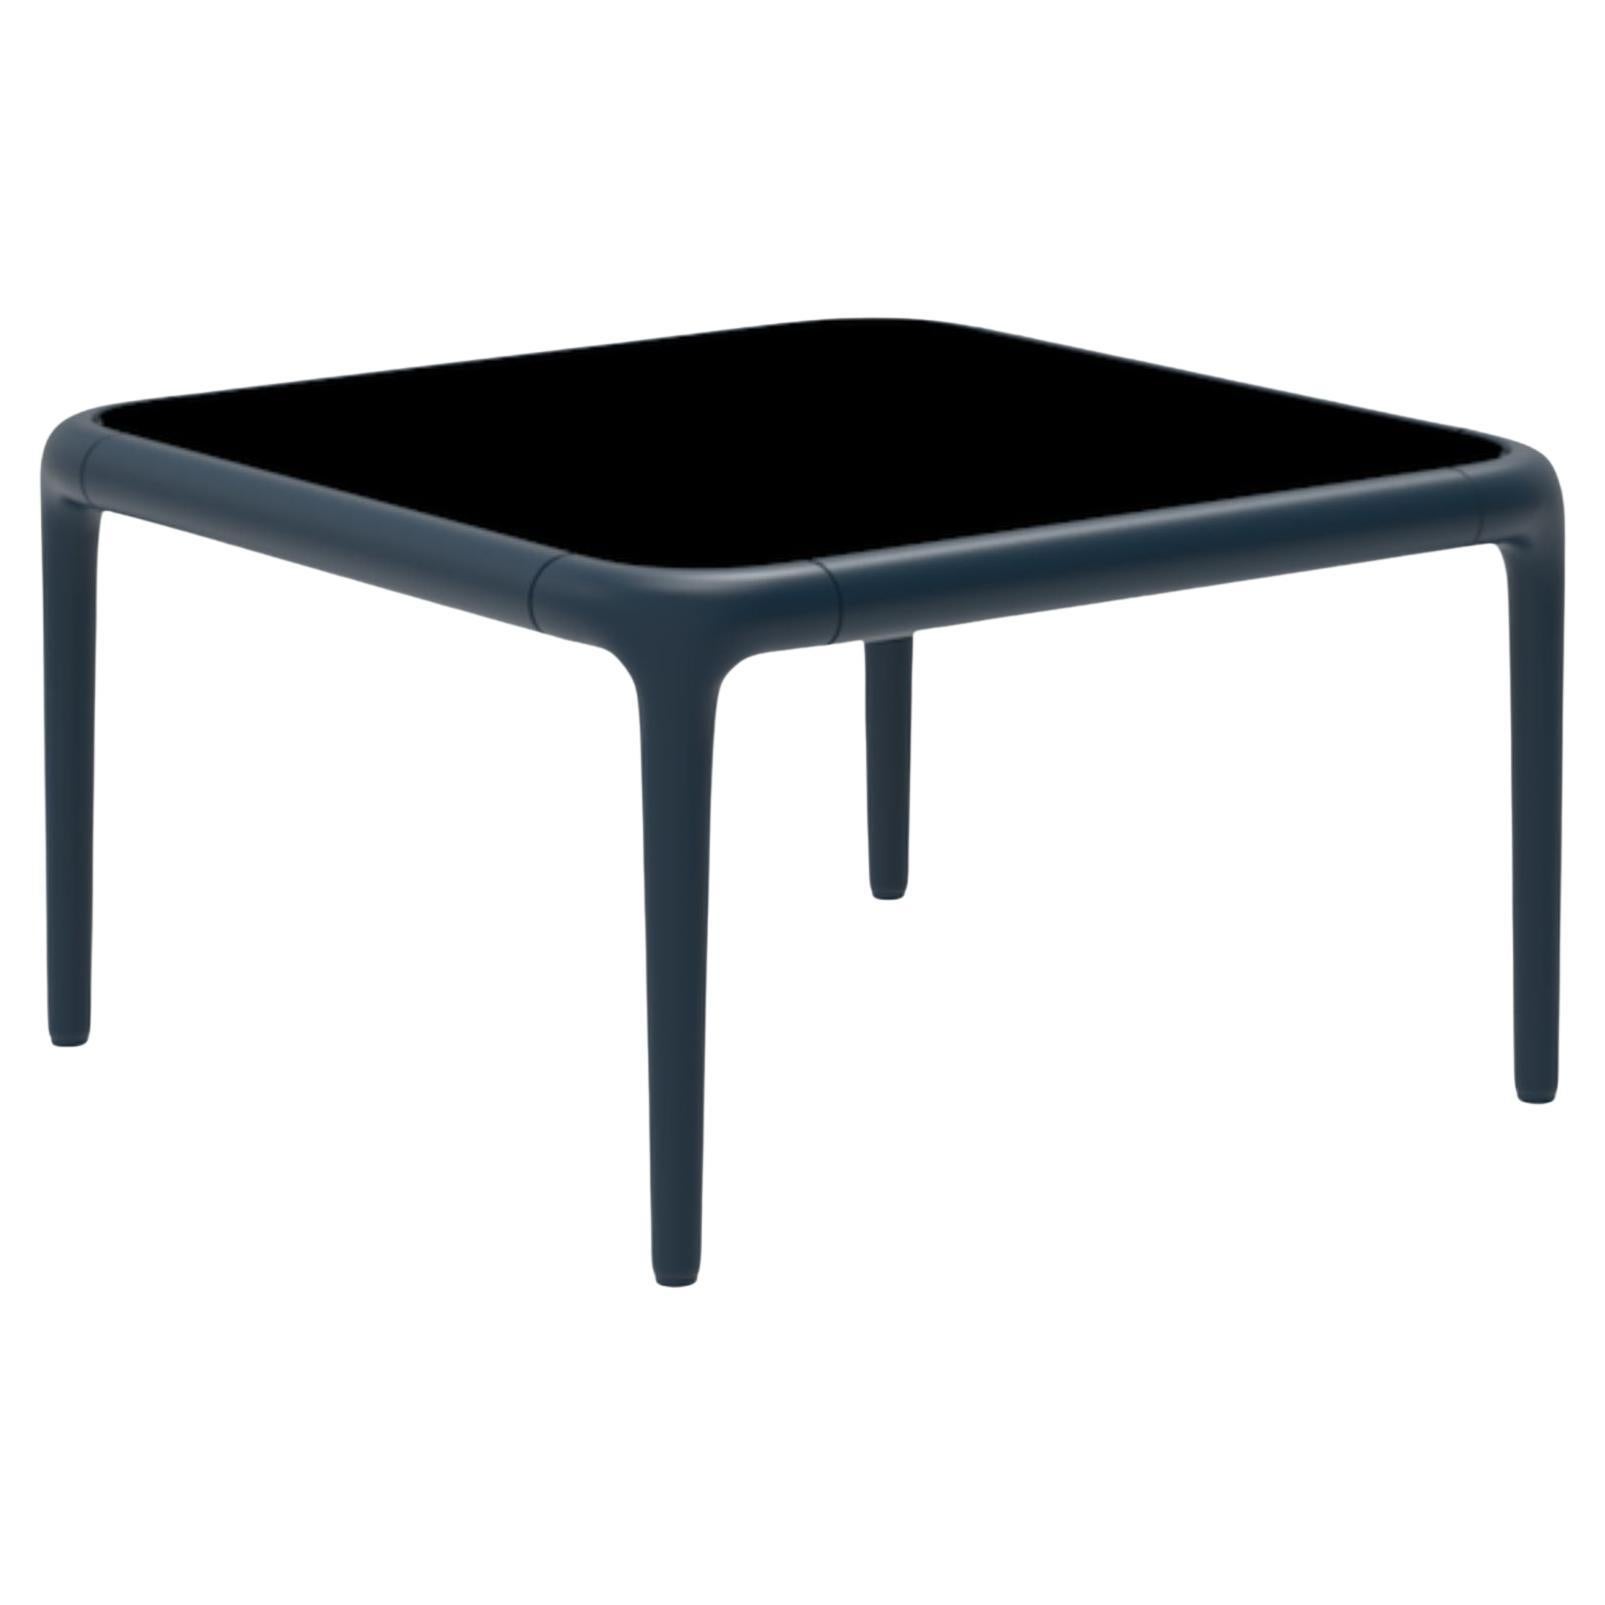 Xaloc Navy Coffee Table 50 with Glass Top by Mowee